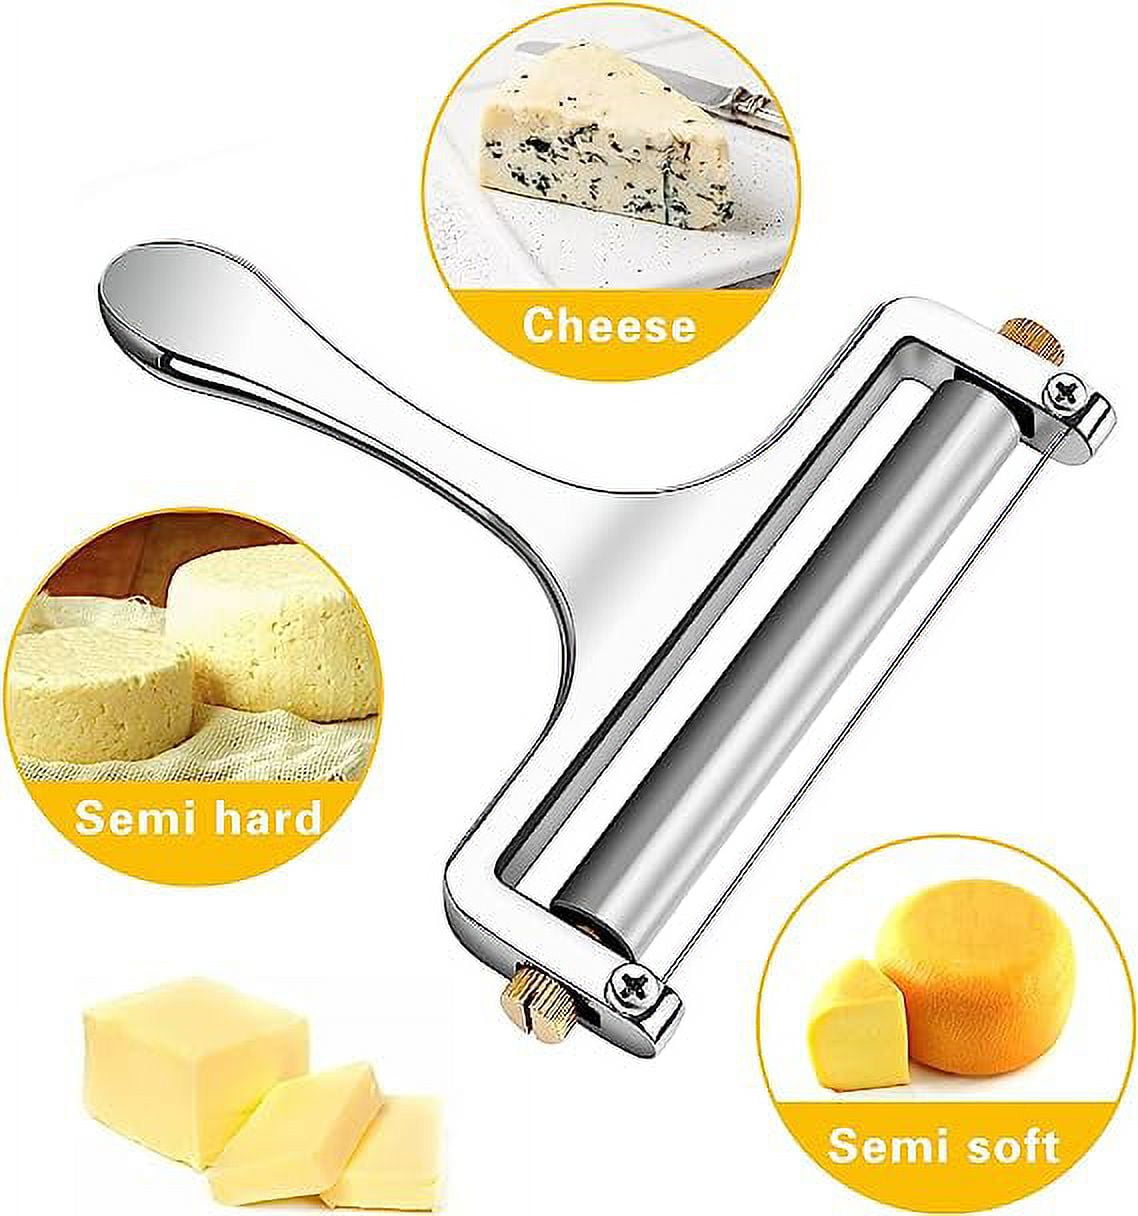 TOPULORS Cheese Slicer Stainless Steel, Cheese Knife Heavy Duty Plane Cheese Cutter, Shaver, Server for Semi-Soft, Semi-Hard Cheese